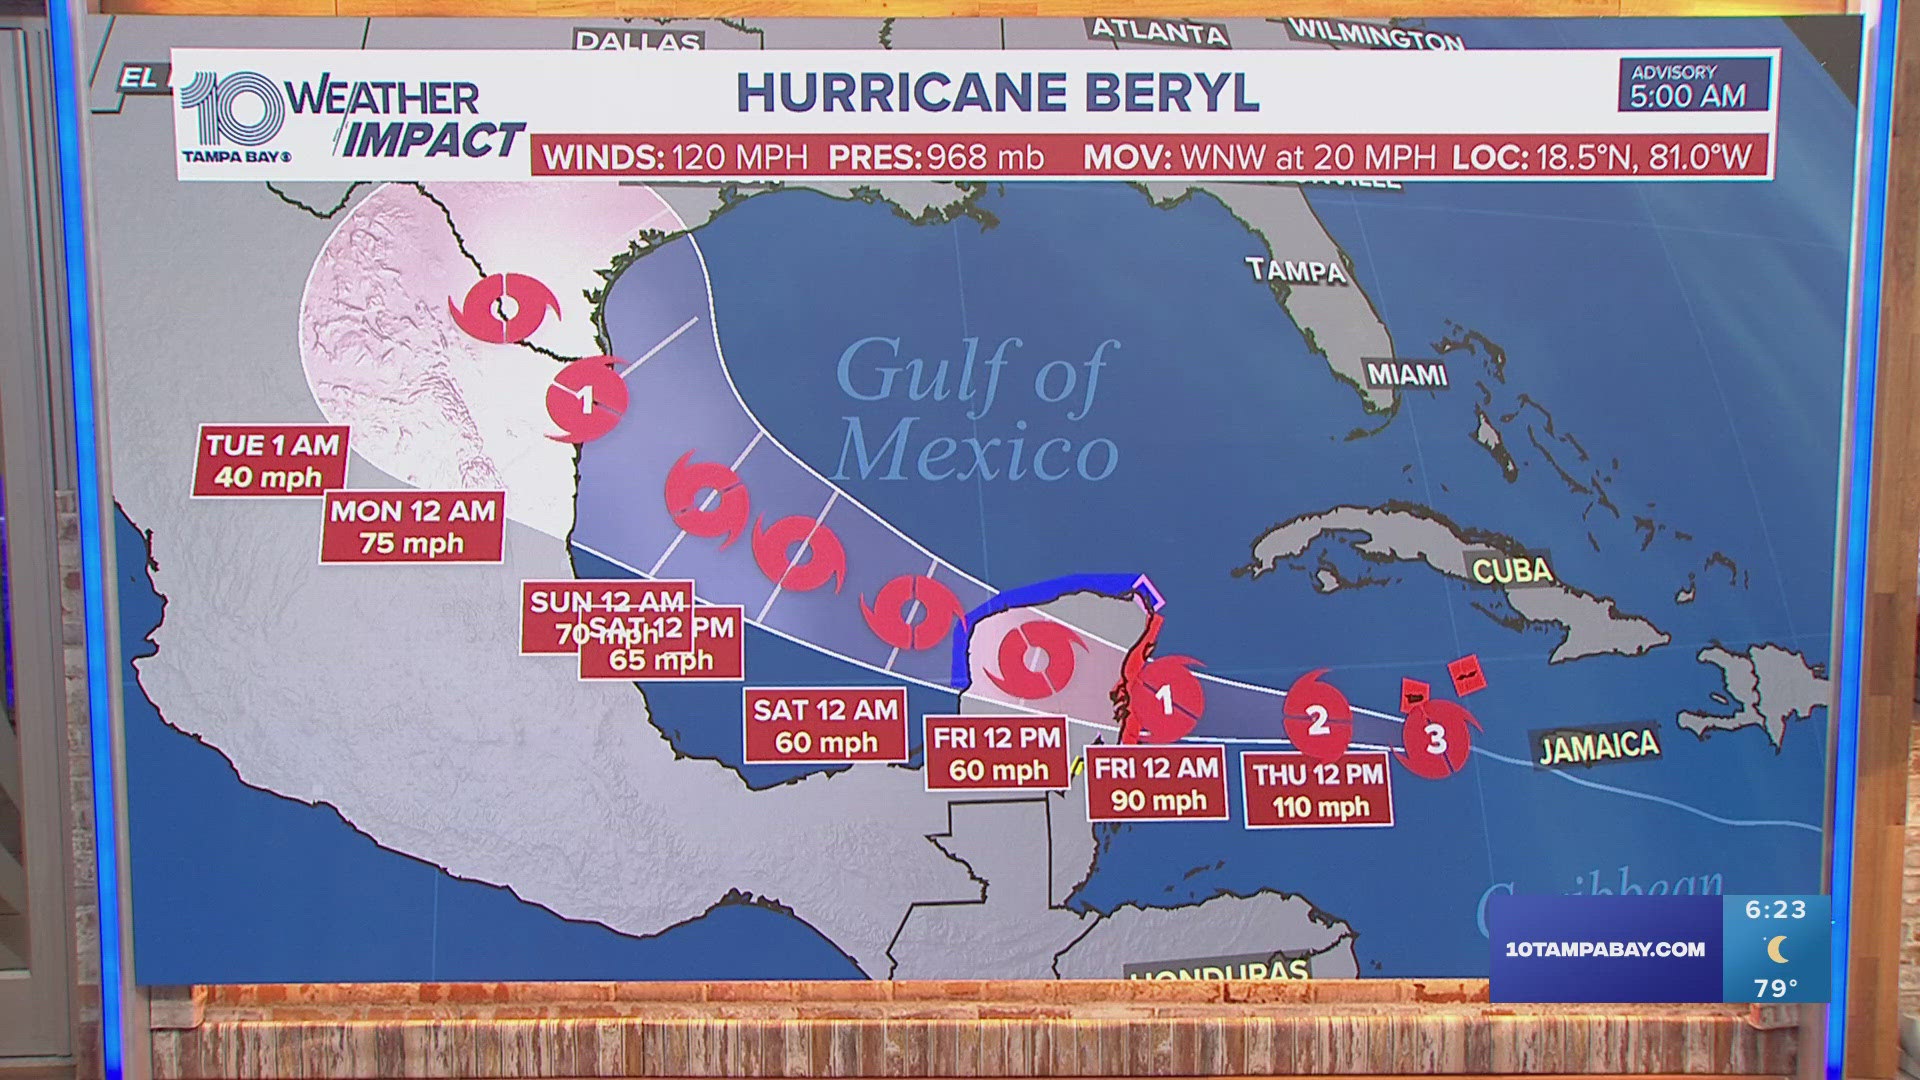 Beyrl is bringing strong winds, dangerous storm surge and damaging waves to the Cayman Islands.